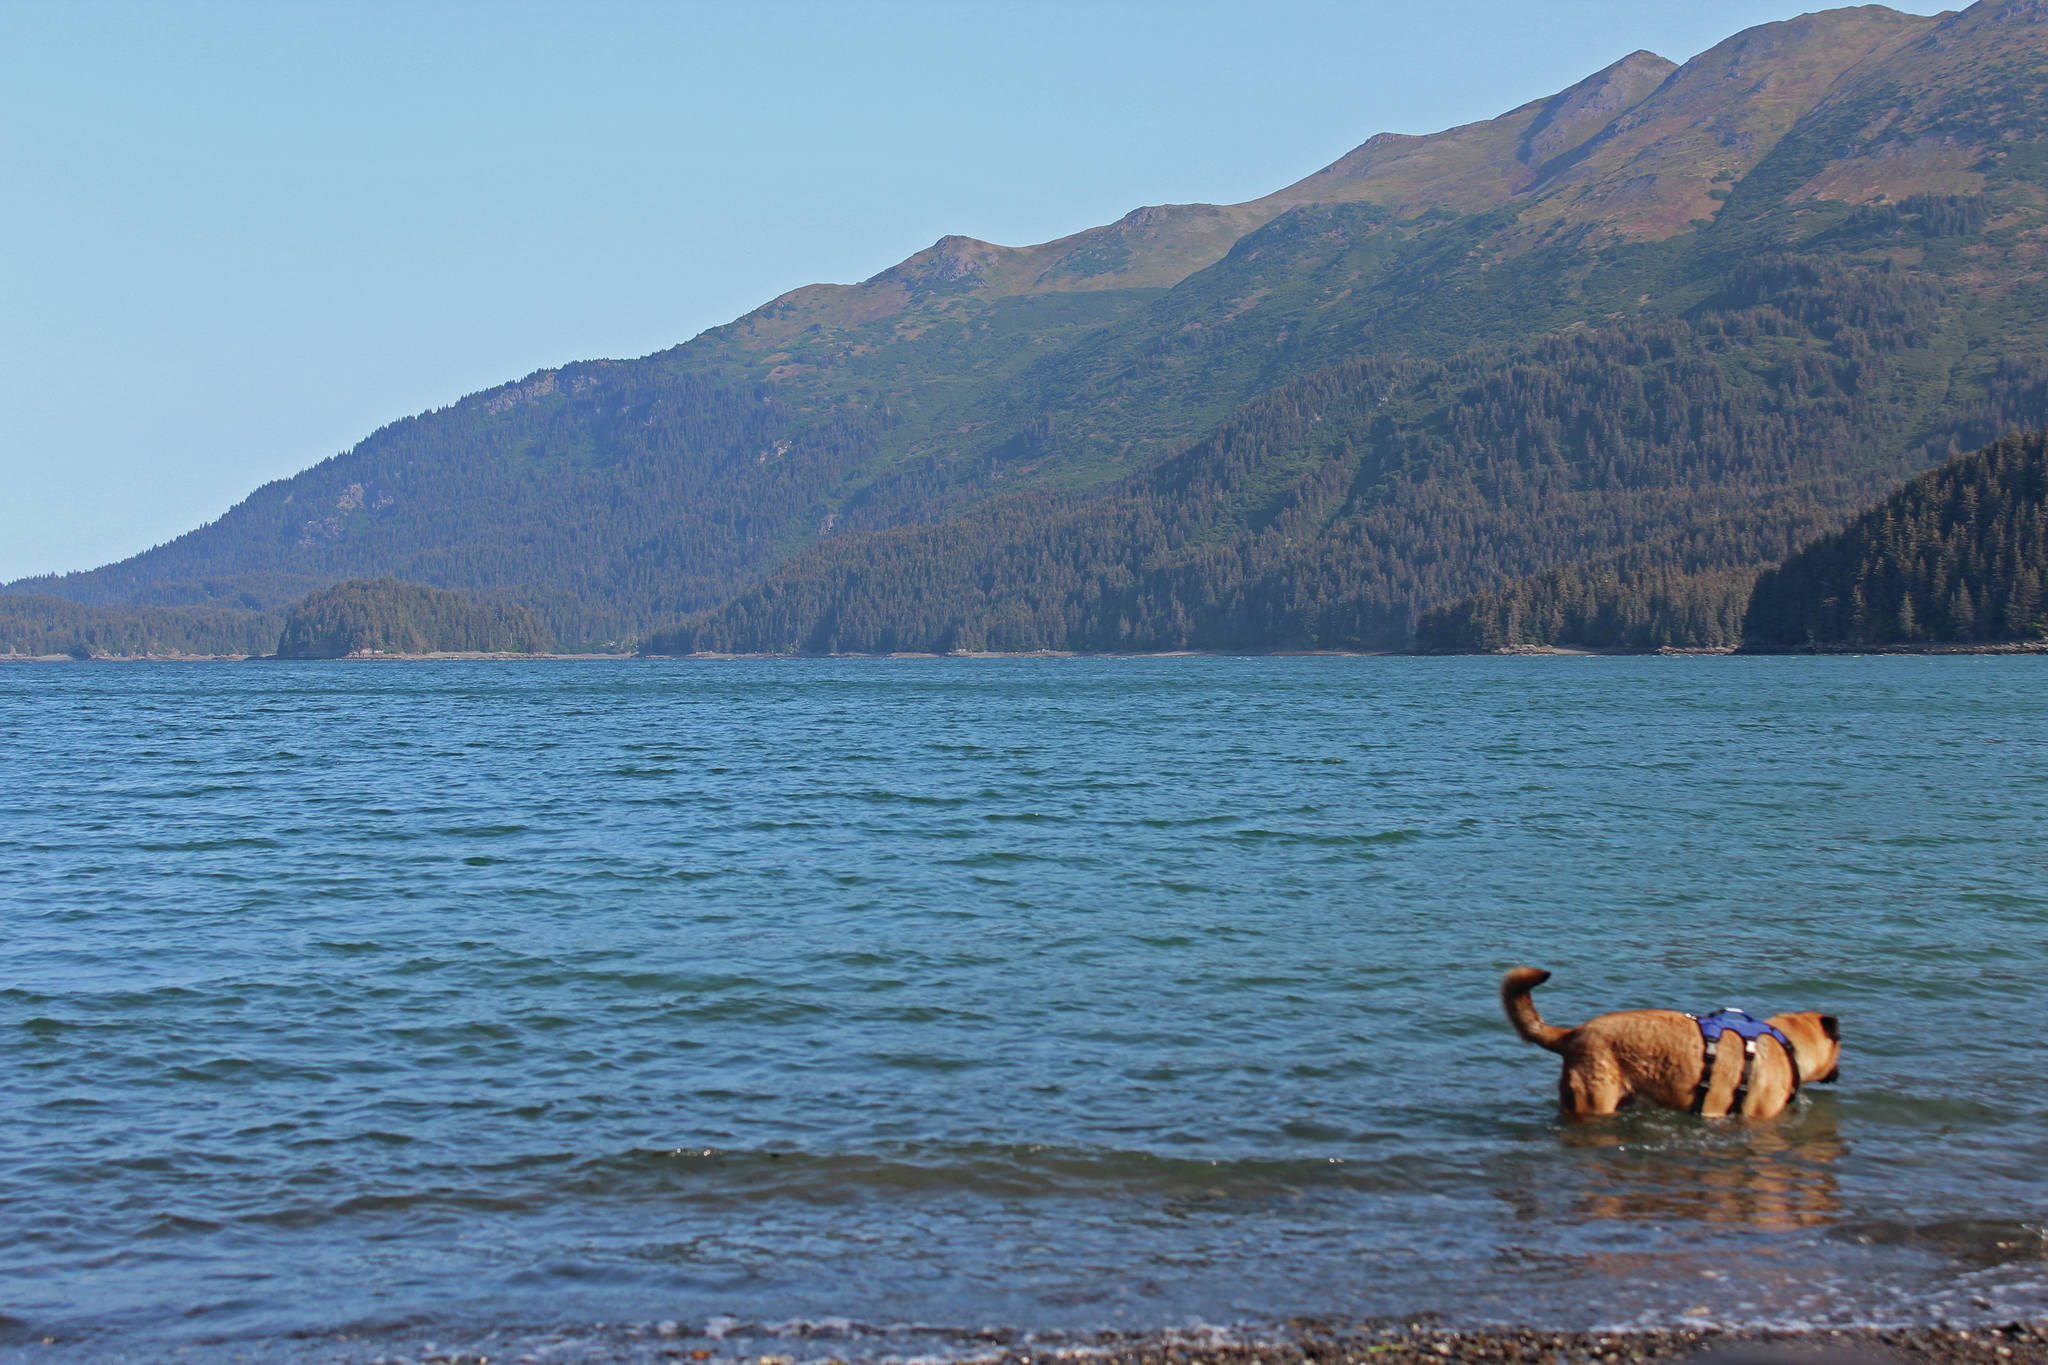 A dog cools off in Tutka Bay in August, 2019 across Kachemak Bay from Homer, Alaska. (Photo by Megan Pacer/Homer News)